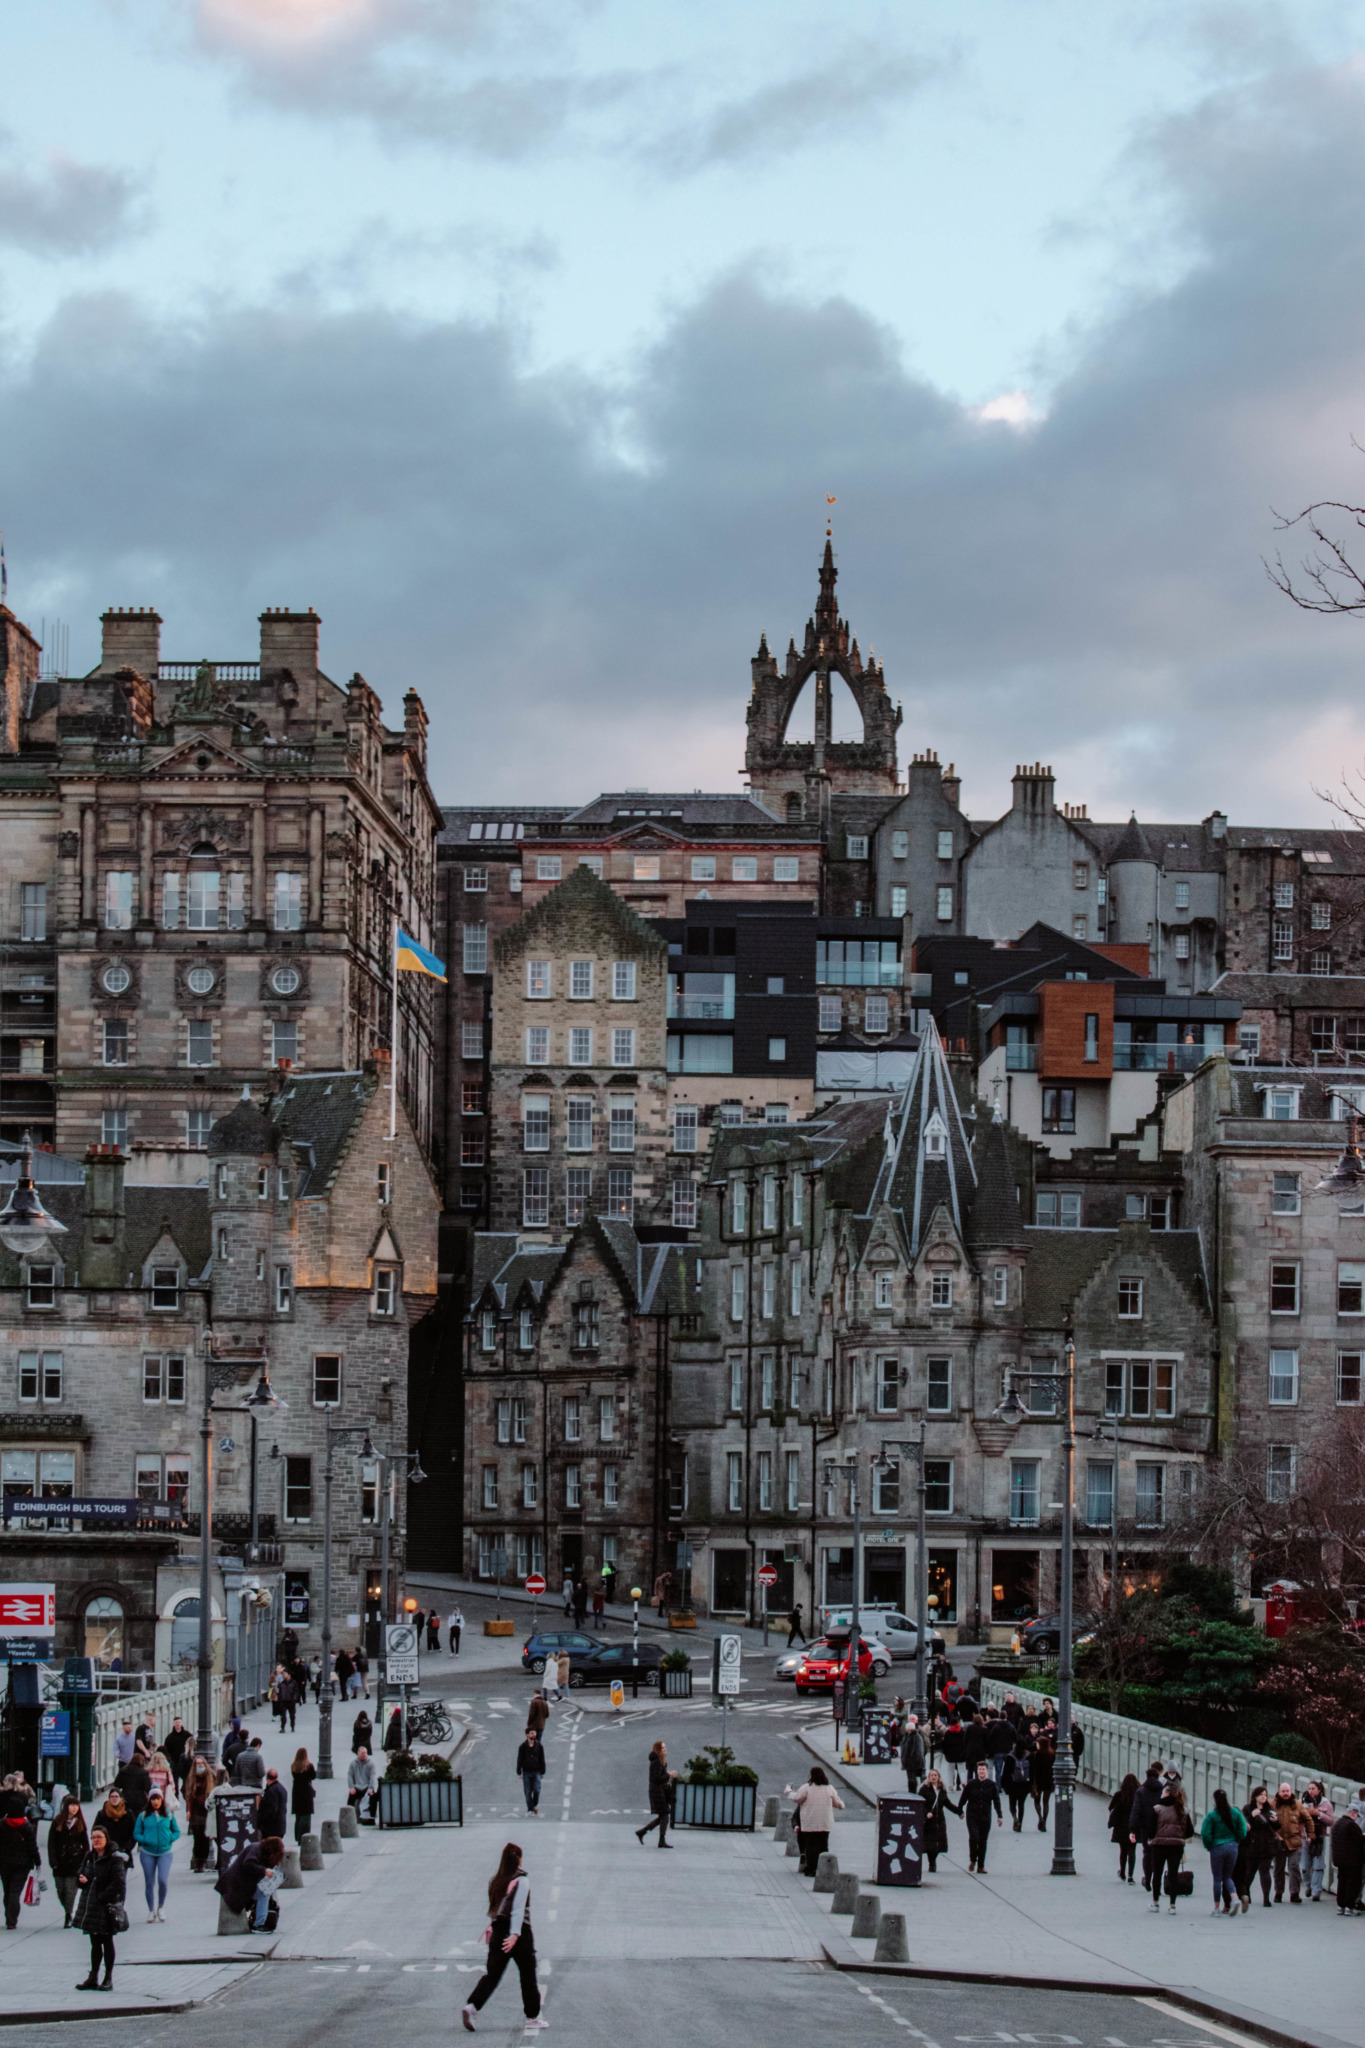 places to visit between edinburgh and glasgow